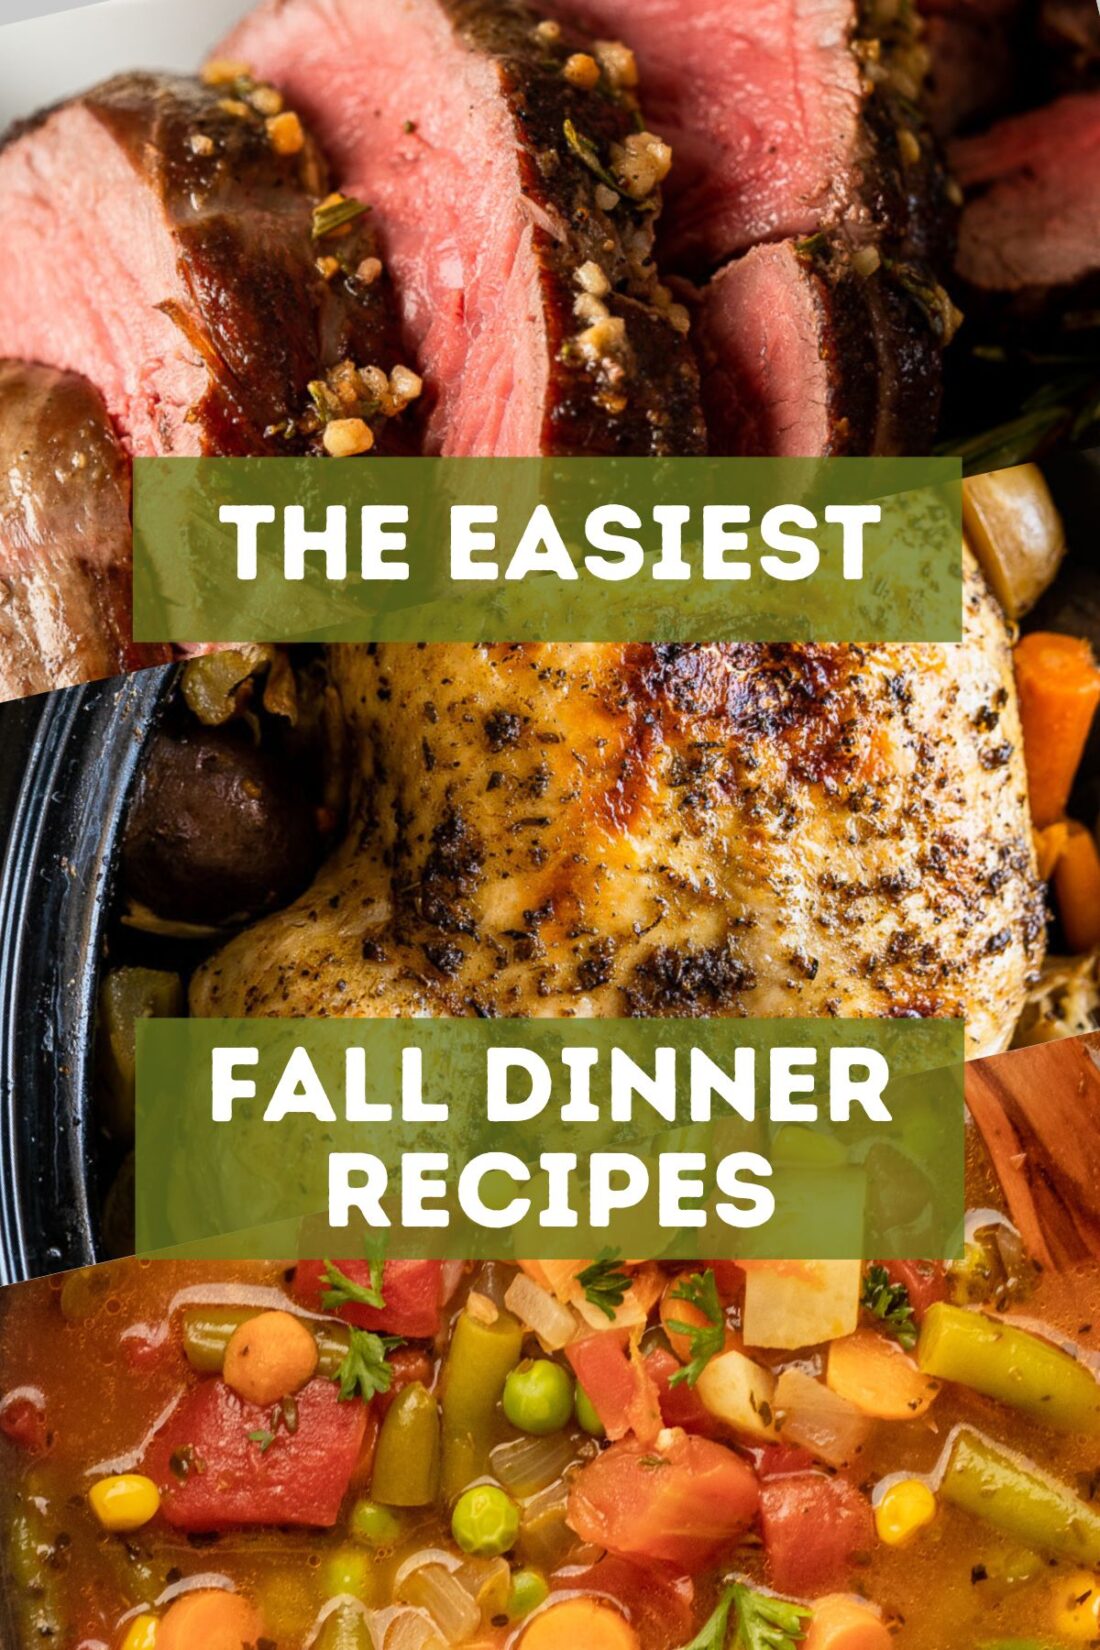 three easy fall dinner recipes featuring beef tenderloin, roasted chicken and vegetable soup.